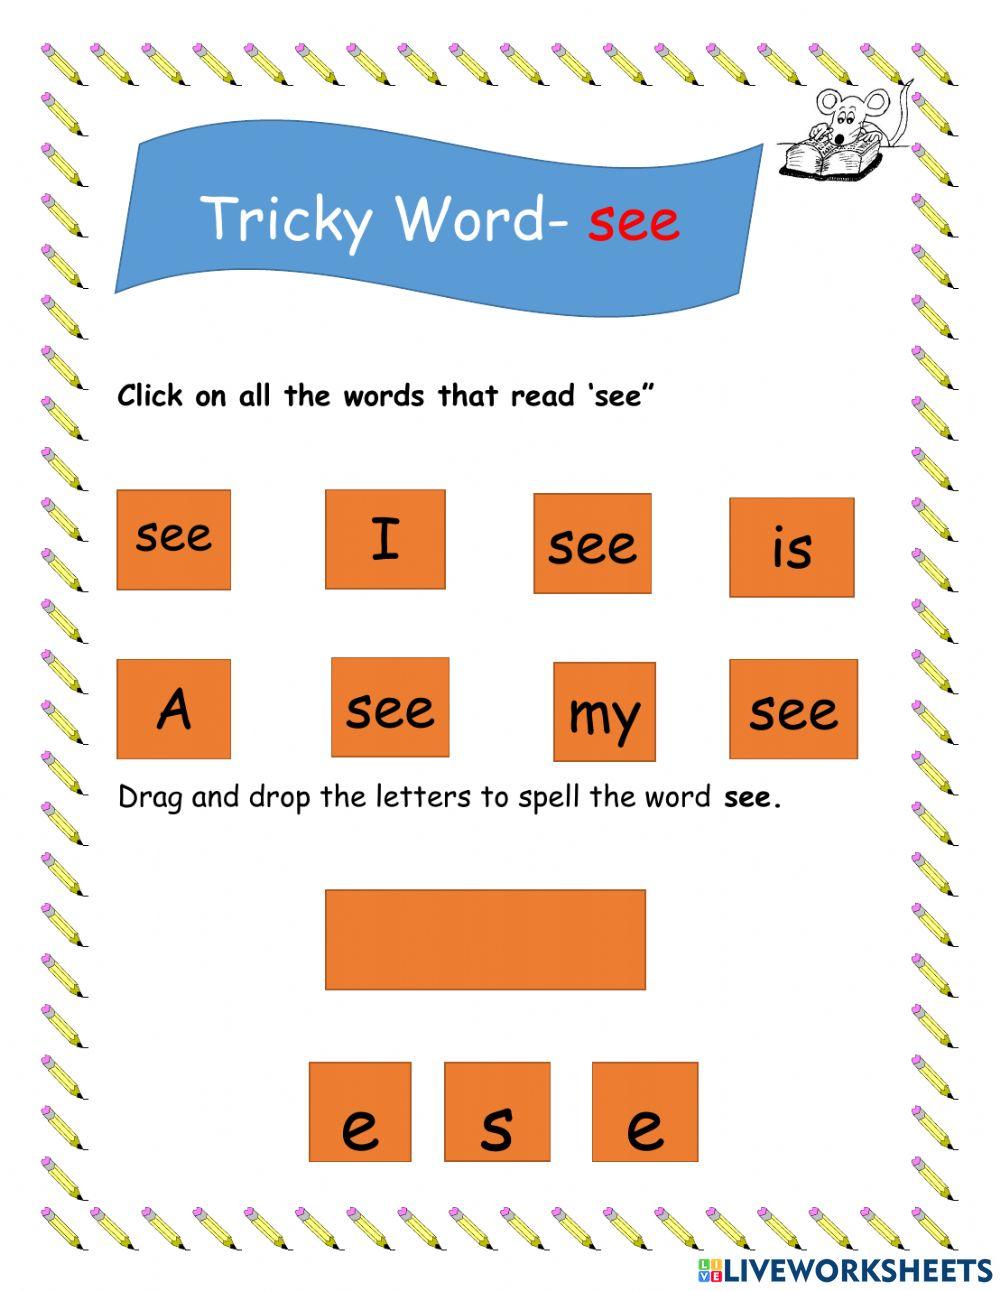 Tricky word 'see'